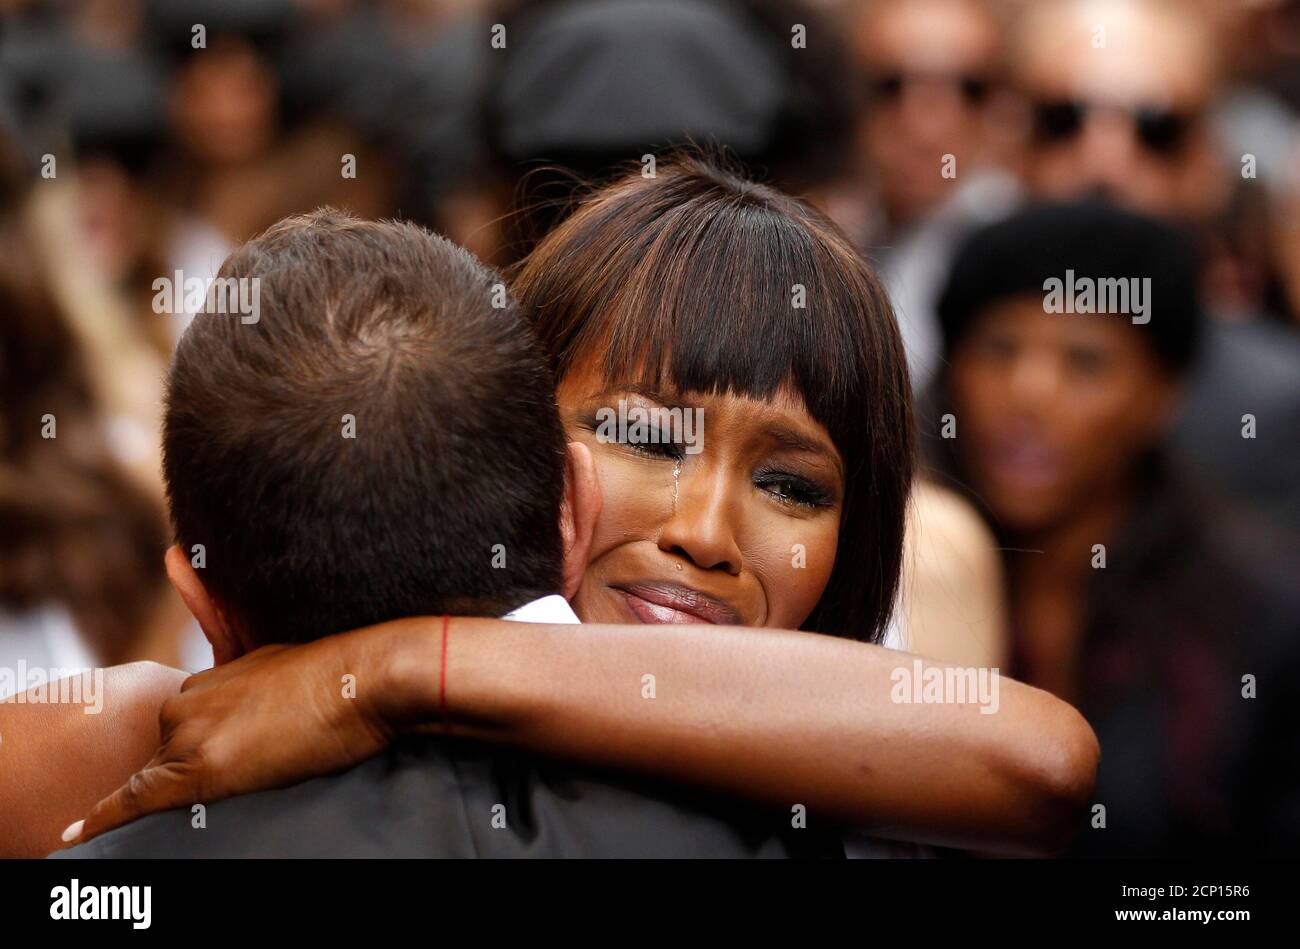 British model Naomi Campbell (R) crying as she embrace Italian designer  Stefano Gabbana during a party marking the 25th anniversary of her career  in downtown Milan September 26, 2010. REUTERS/Stefano Rellandini (ITALY -